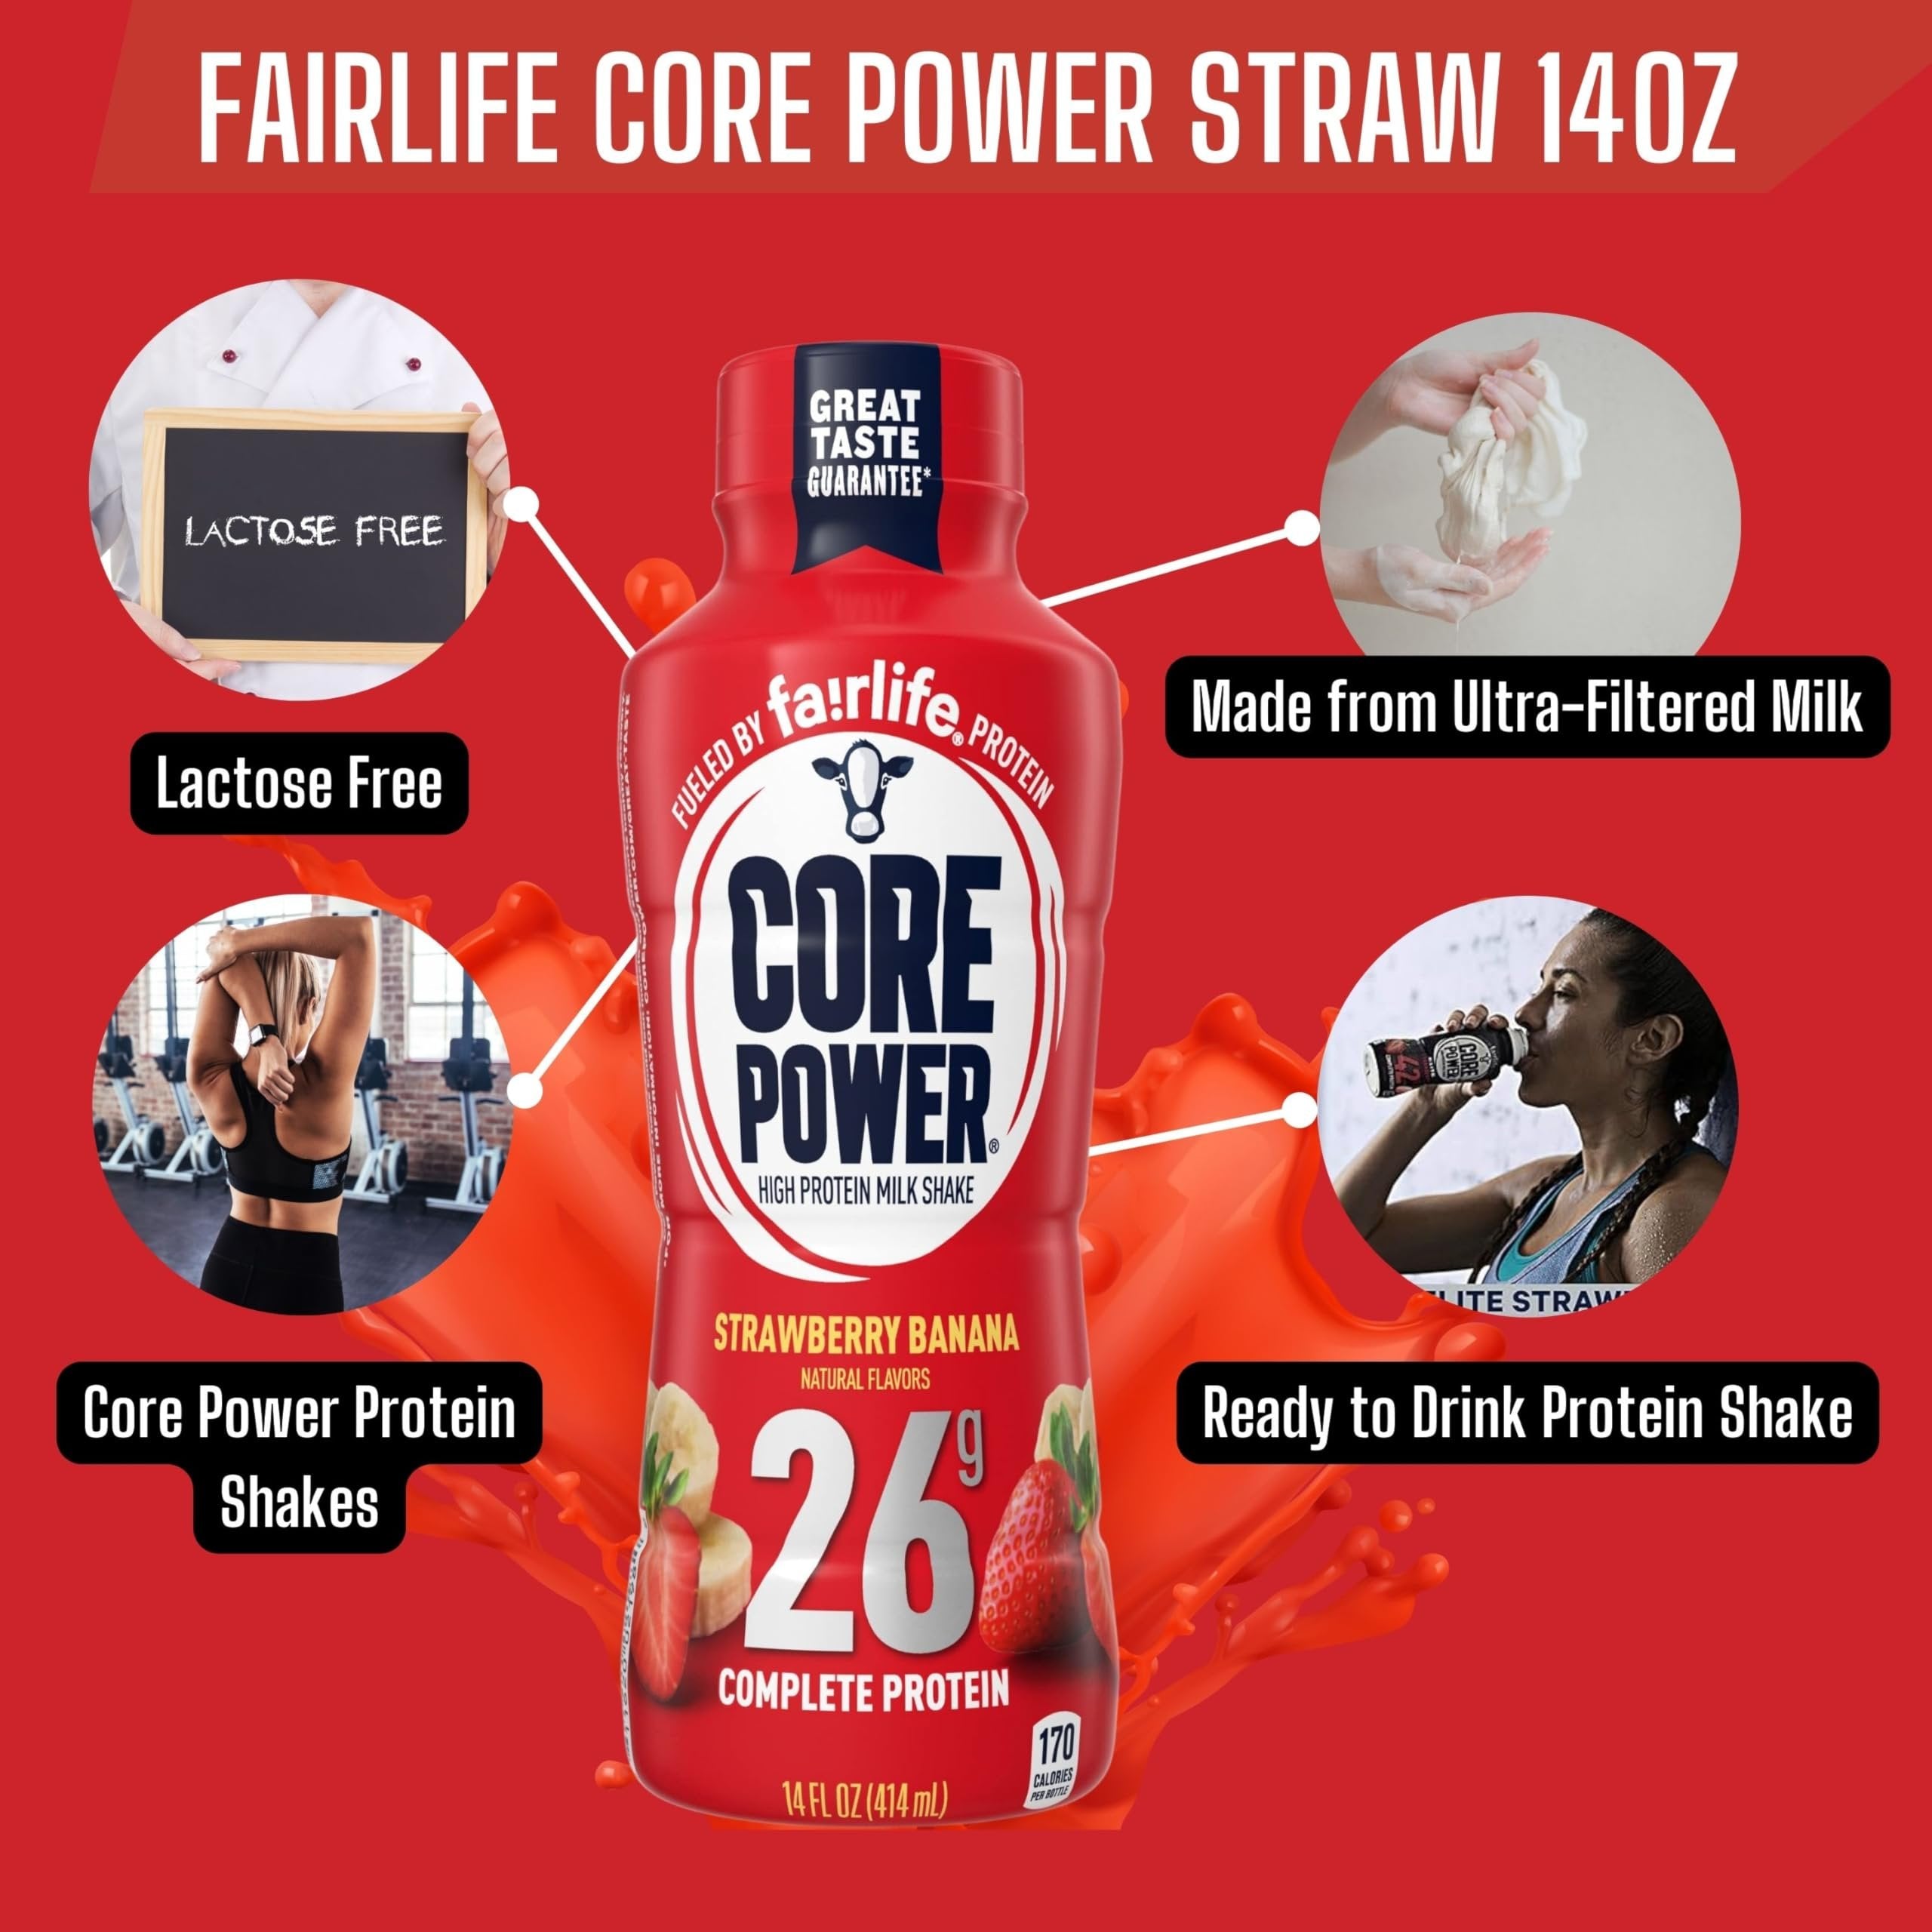 Core Power Fairlife 26g Protein Milk Shakes - Ready To Drink for Workout Recovery - Strawberry Banana Flavor, 14 Fl Oz (Pack of 12) and Multi-Purpose Key Chain